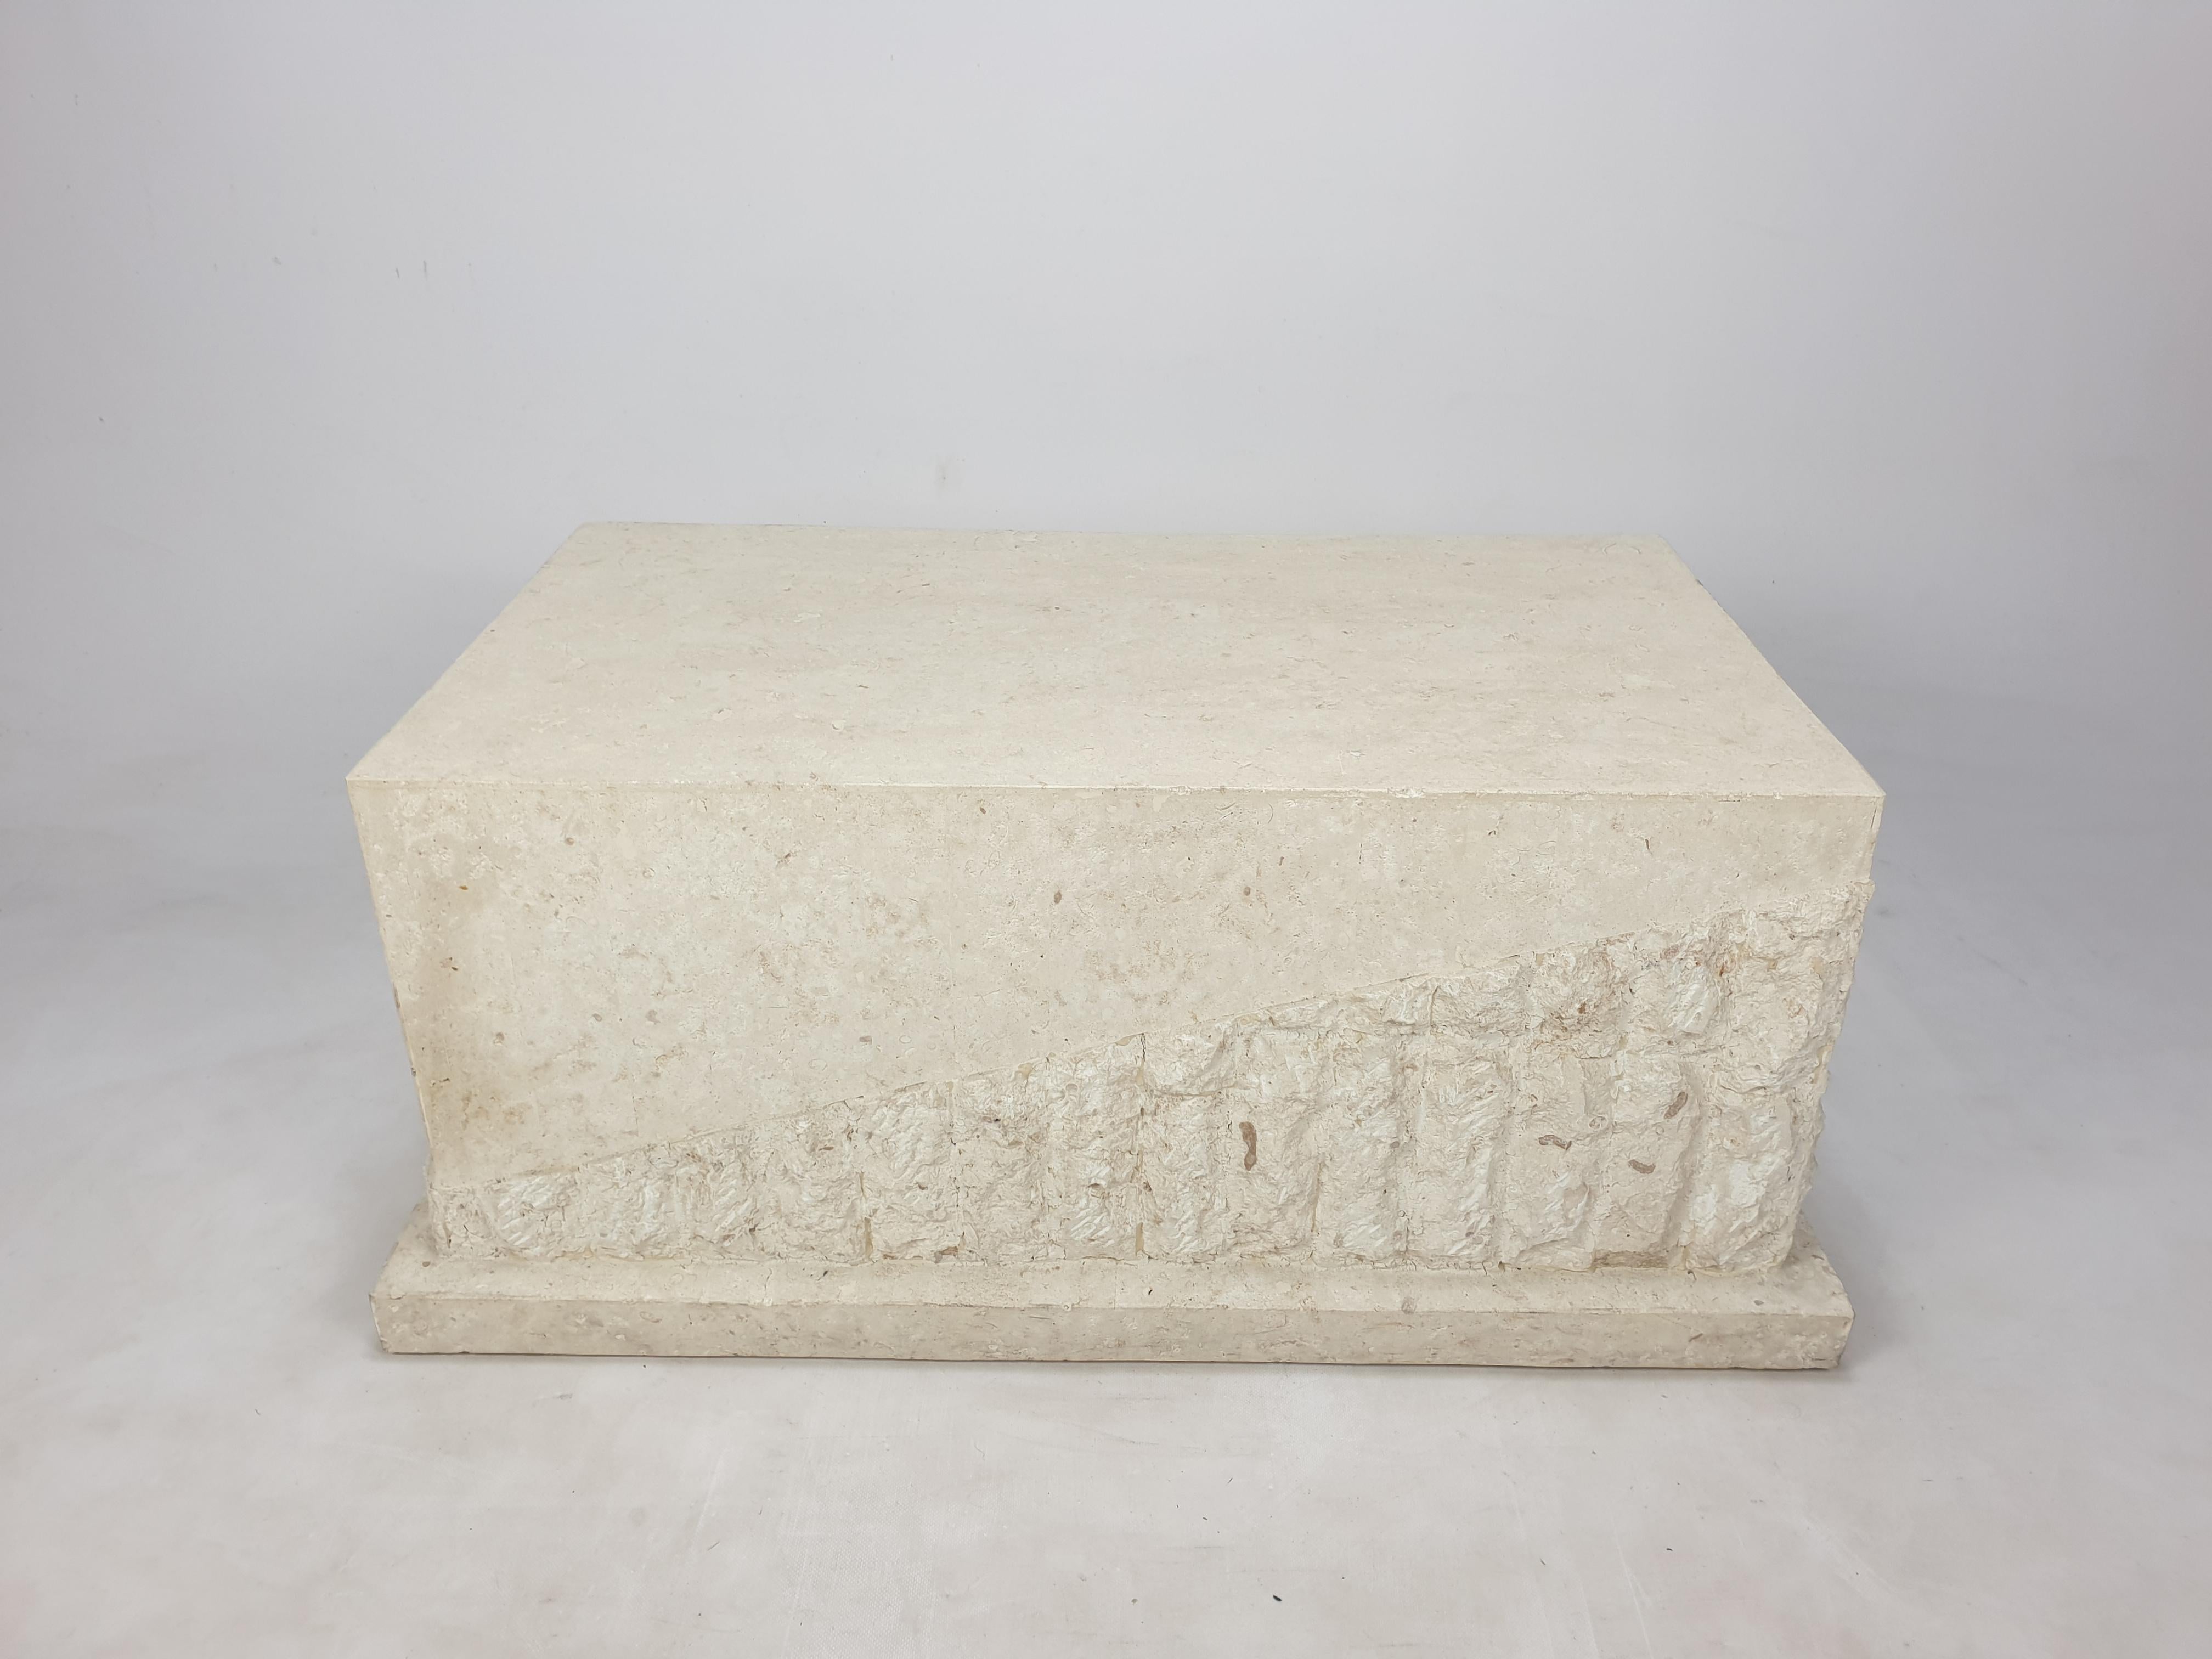 Hand-Crafted Magnussen Ponte Mactan Stone or Fossil Stone Coffee Table, 1980s For Sale